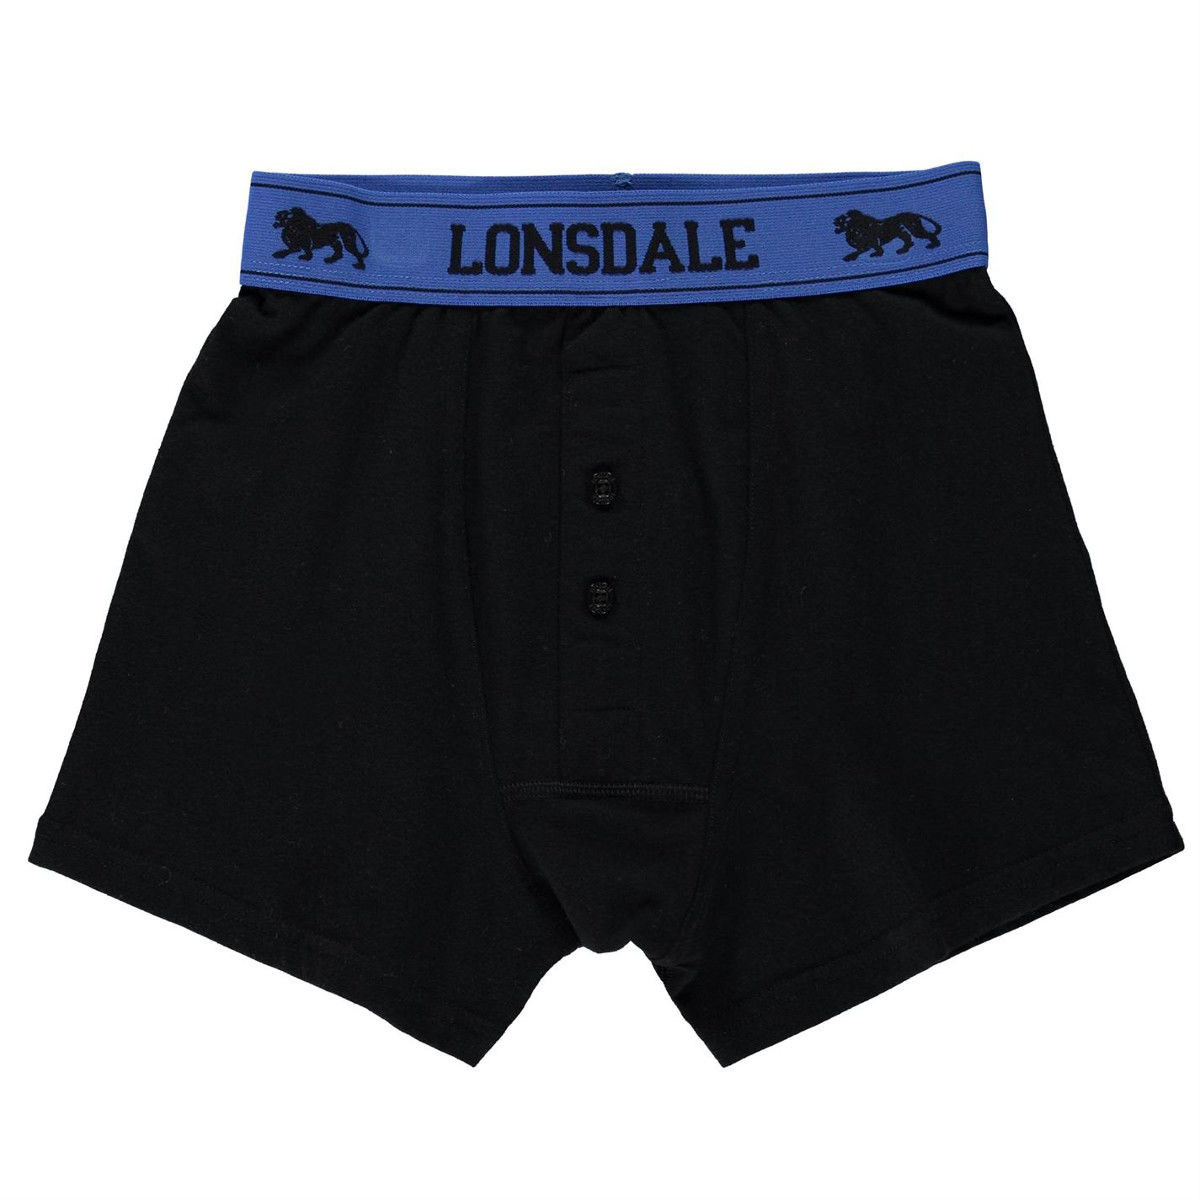 Lonsdale Boys' Boxers, 2-Pack